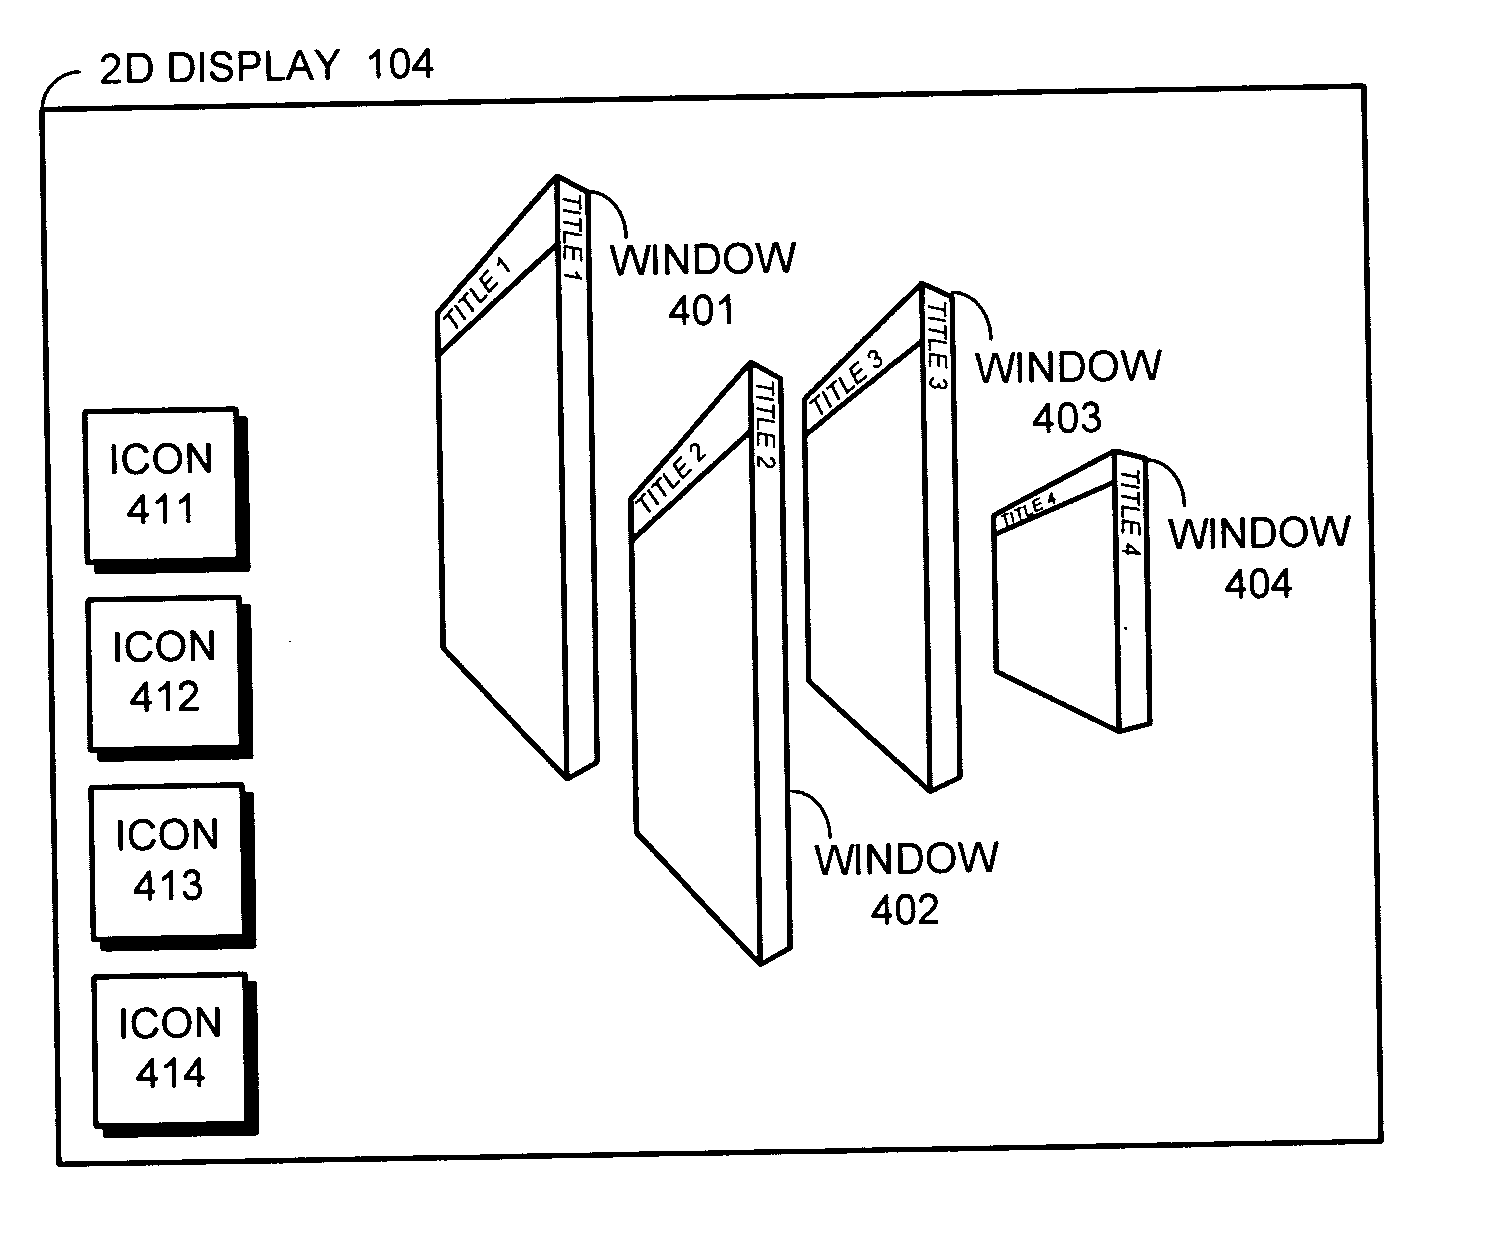 Enhancements for manipulating two-dimensional windows within a three-dimensional display model